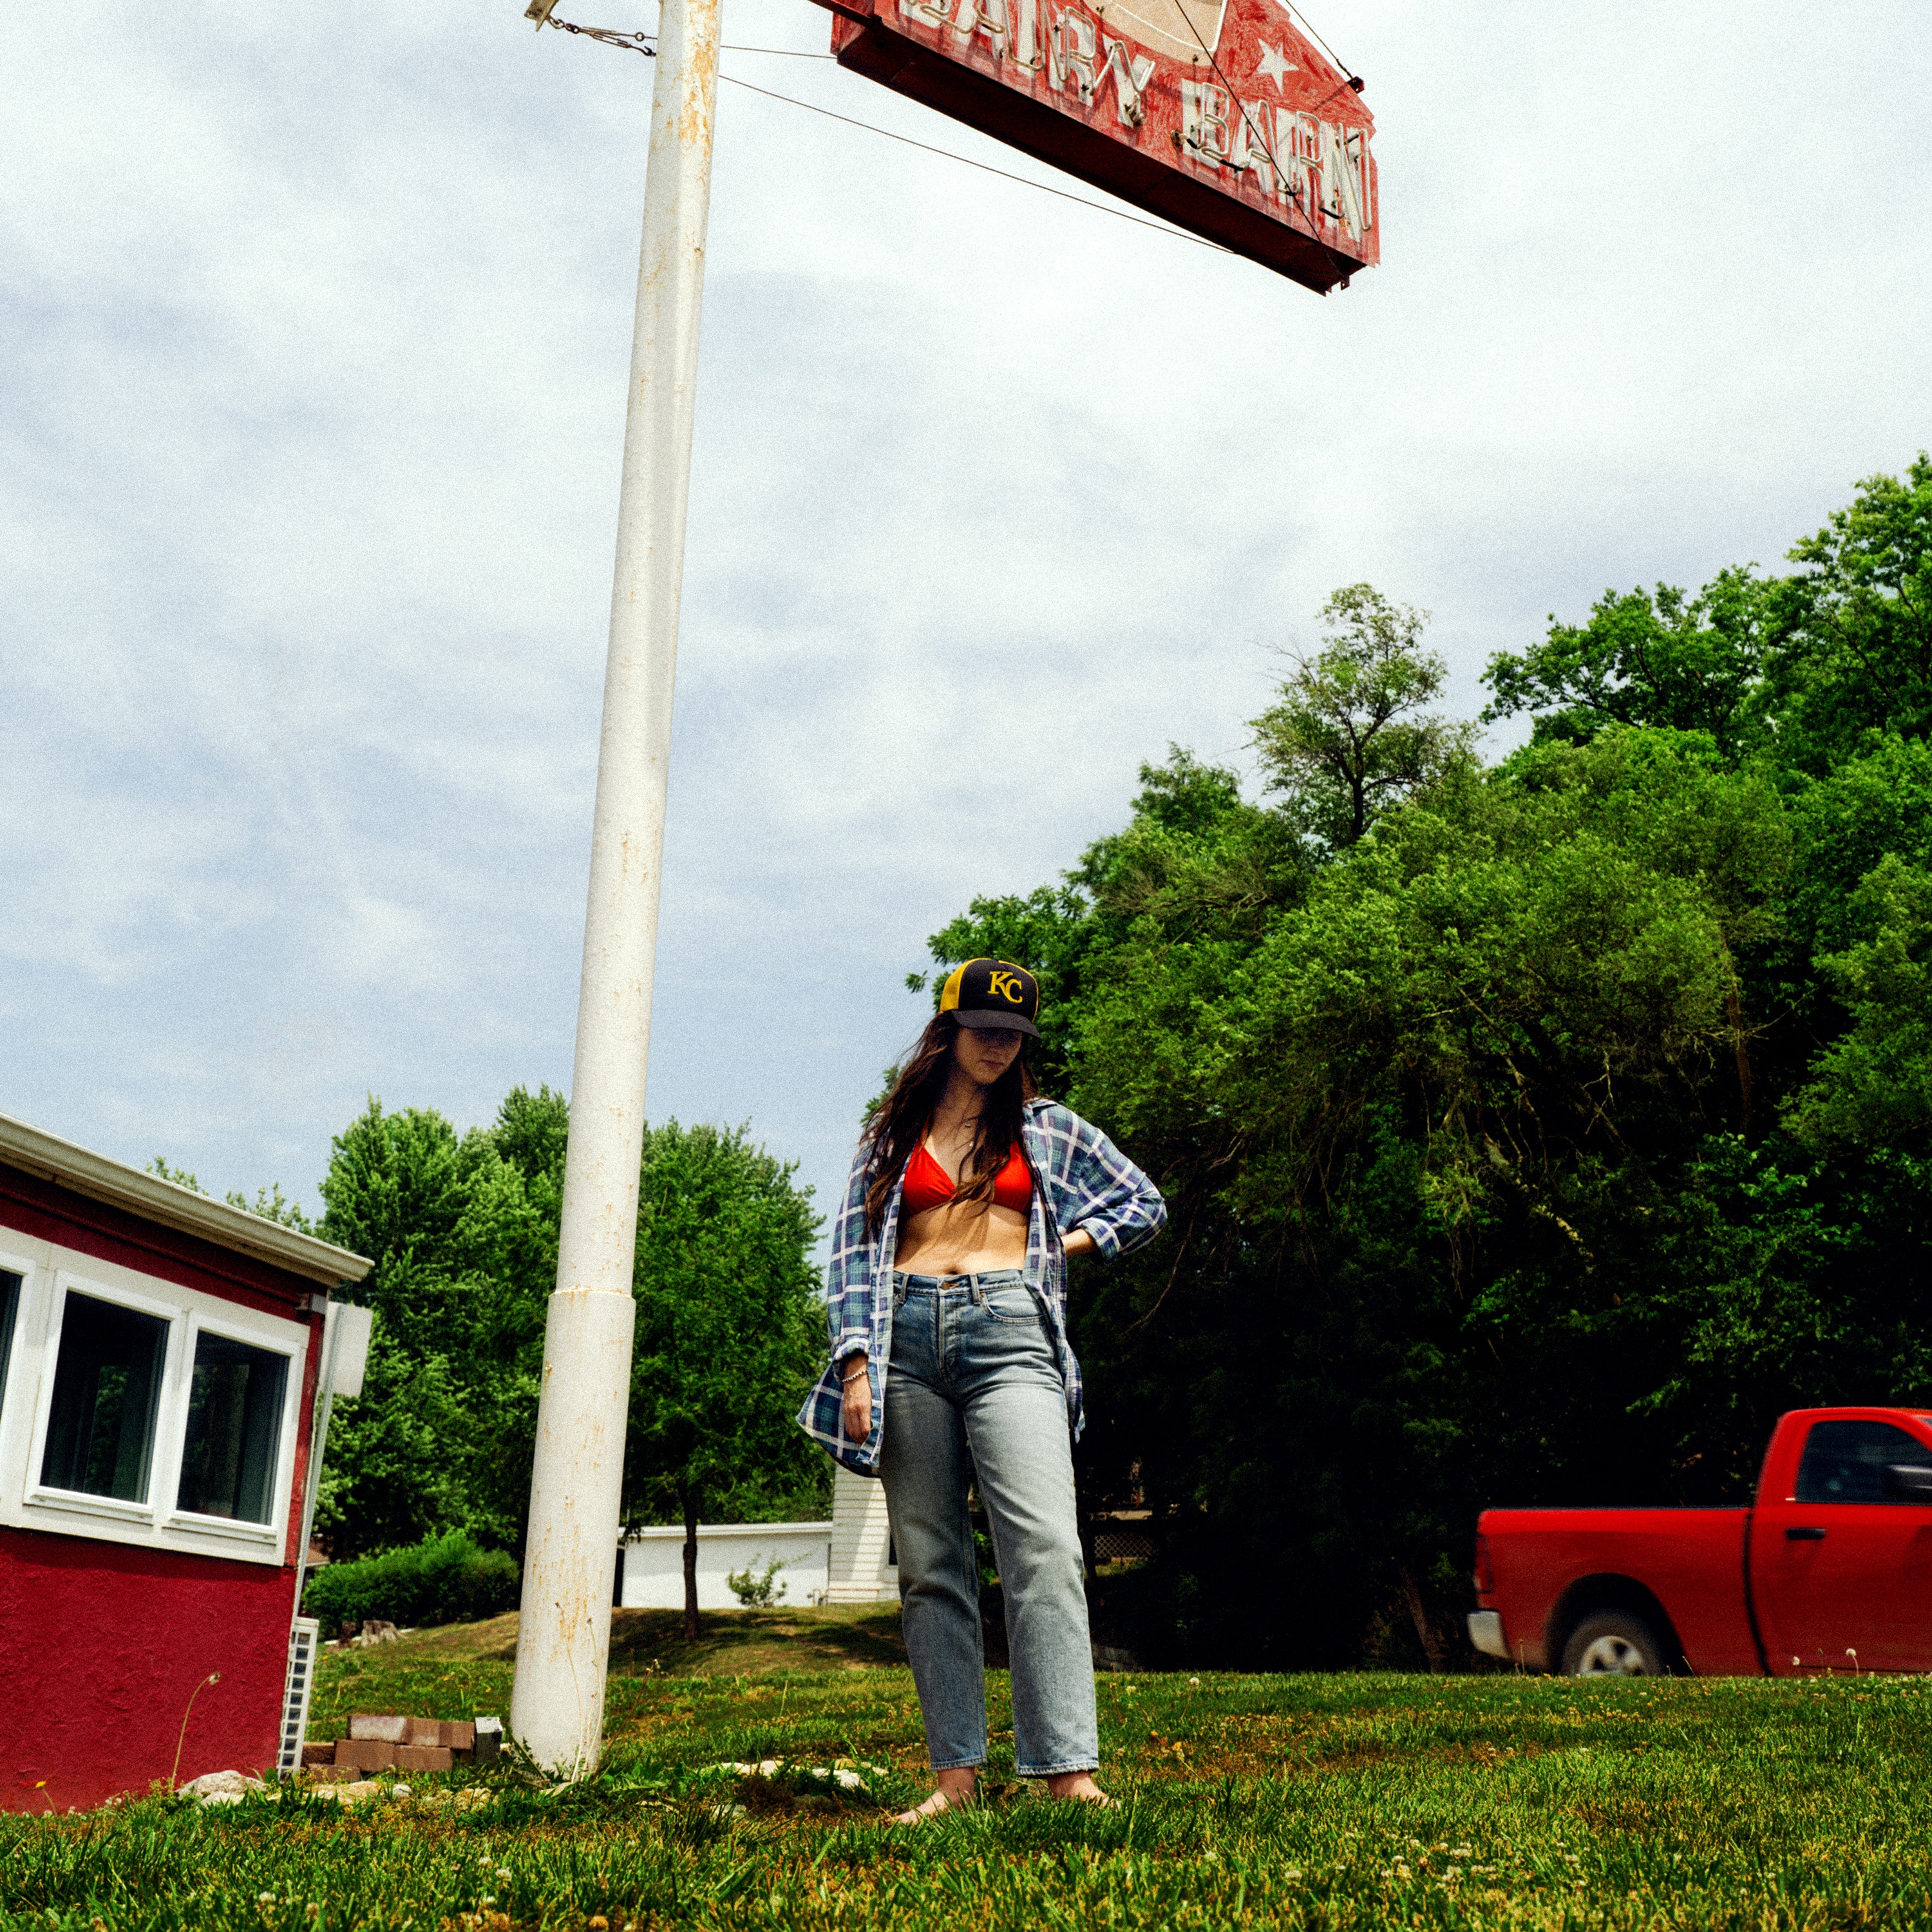 brunette stands in blue jeans, open flannel shirt, red bra and 'KC' trucker cap in field beneath neon sign with red pickup truck